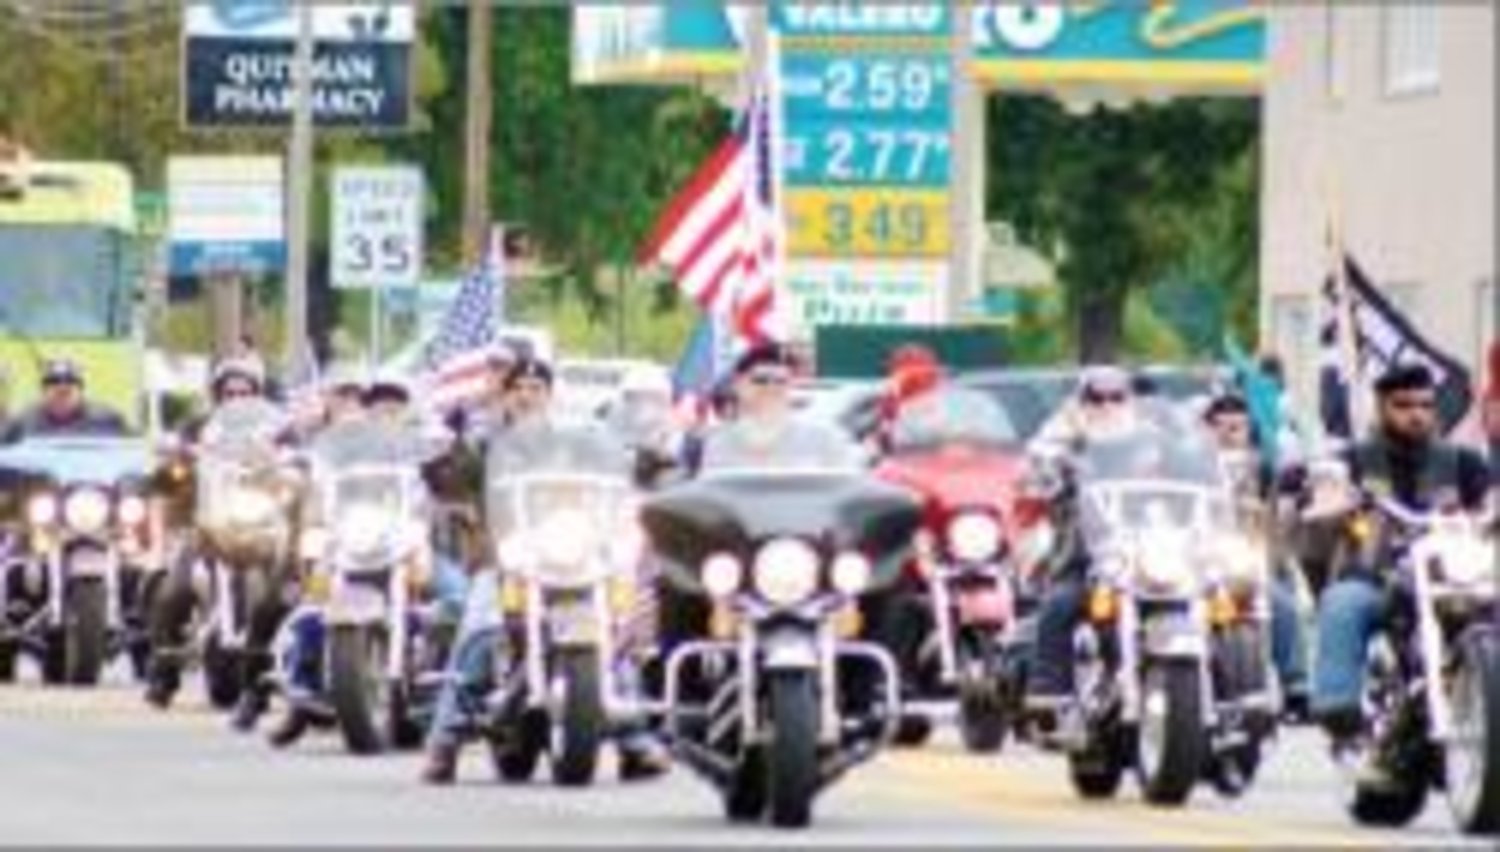 The Black Beret Motorcycle Club led the Veteran's Day Parade in Quitman last Saturday to kick-off Quitman's "Salute to Veterans" held Saturday at Governor Hogg City Park.